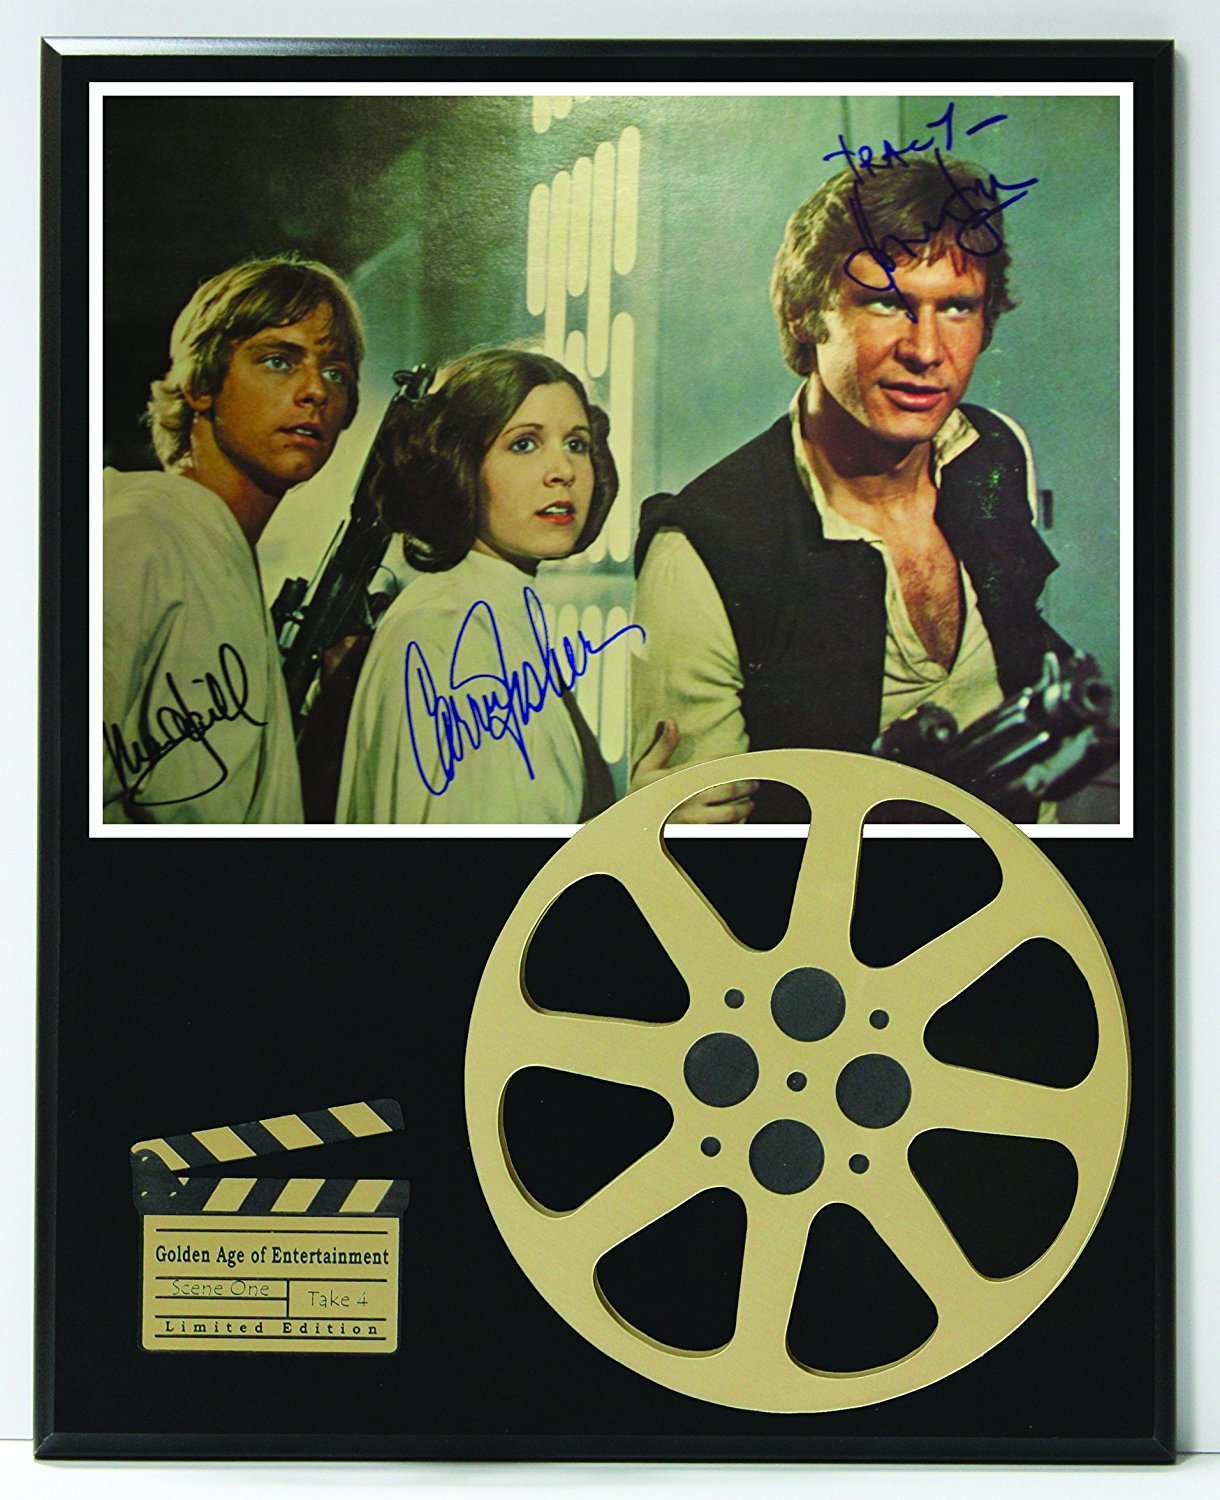 Star Wars Cast Limited Edition Reproduction Autographed Movie Reel Display  K1 - Gold Record Outlet Album and Disc Collectible Memorabilia